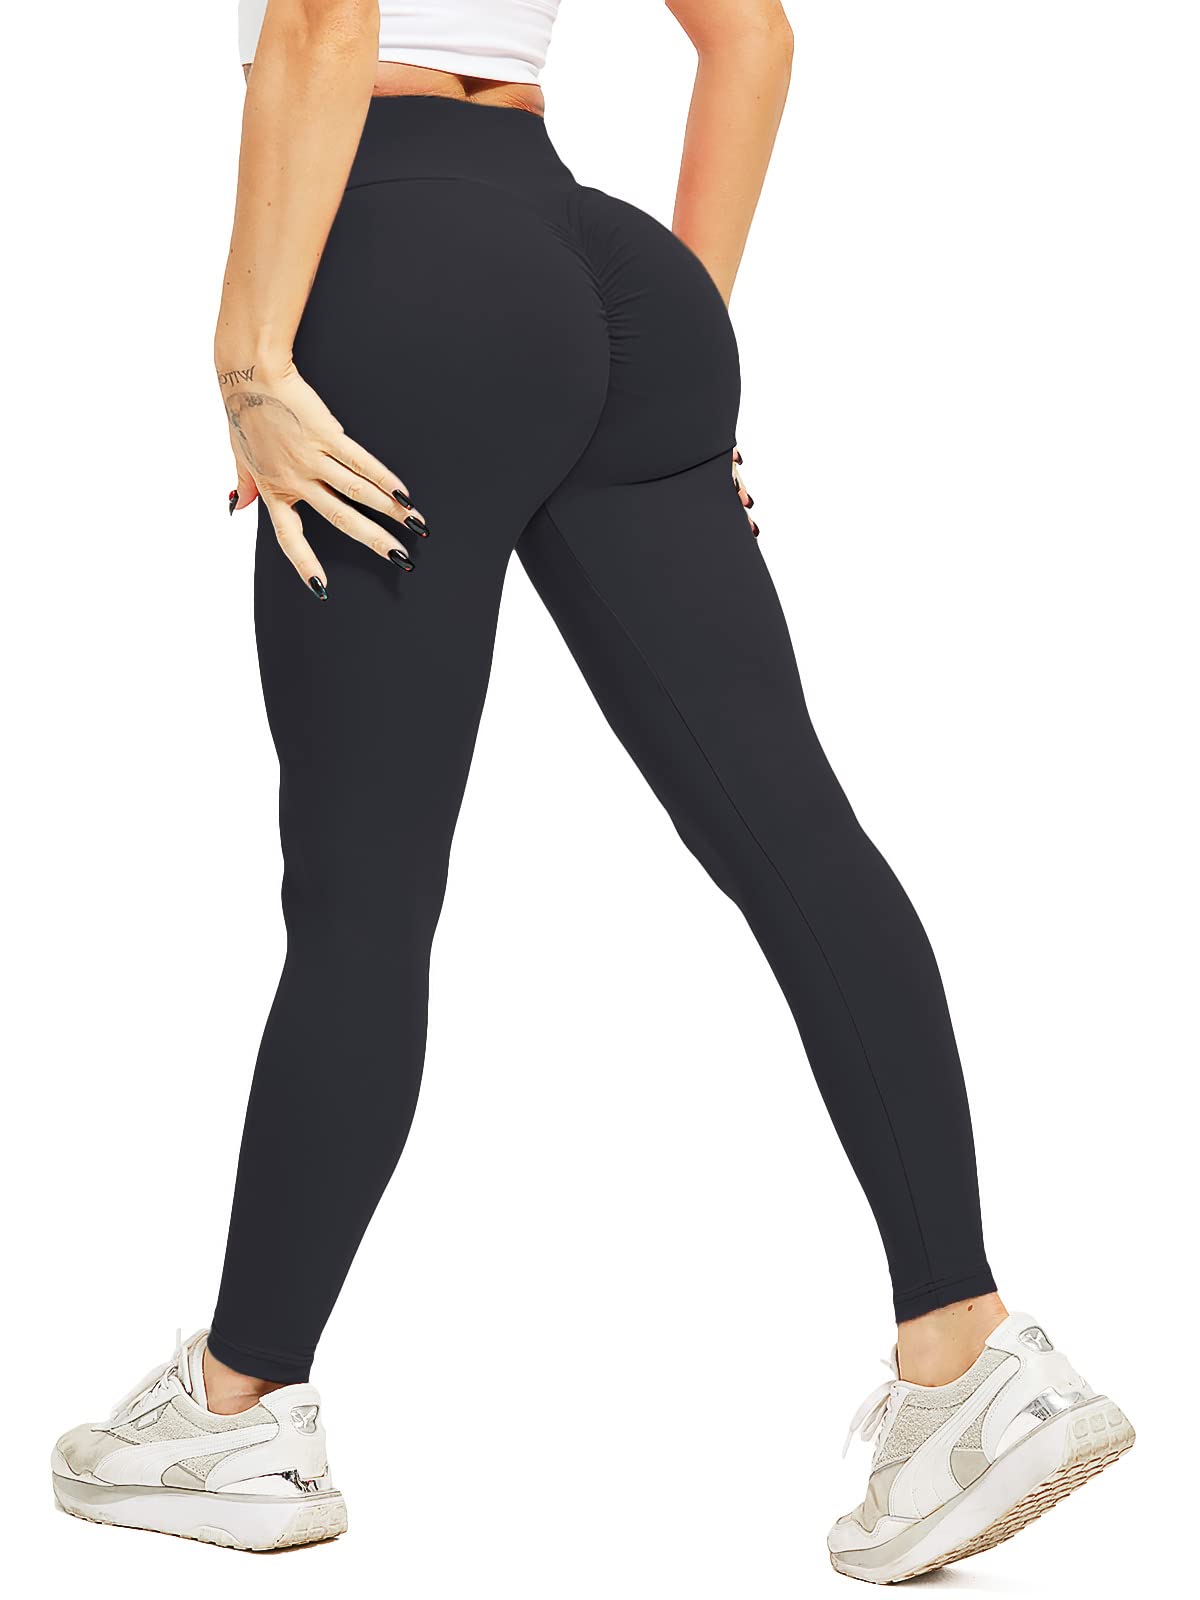 Exclusif HAWILAND Legging push up pour femme - Boom Boo